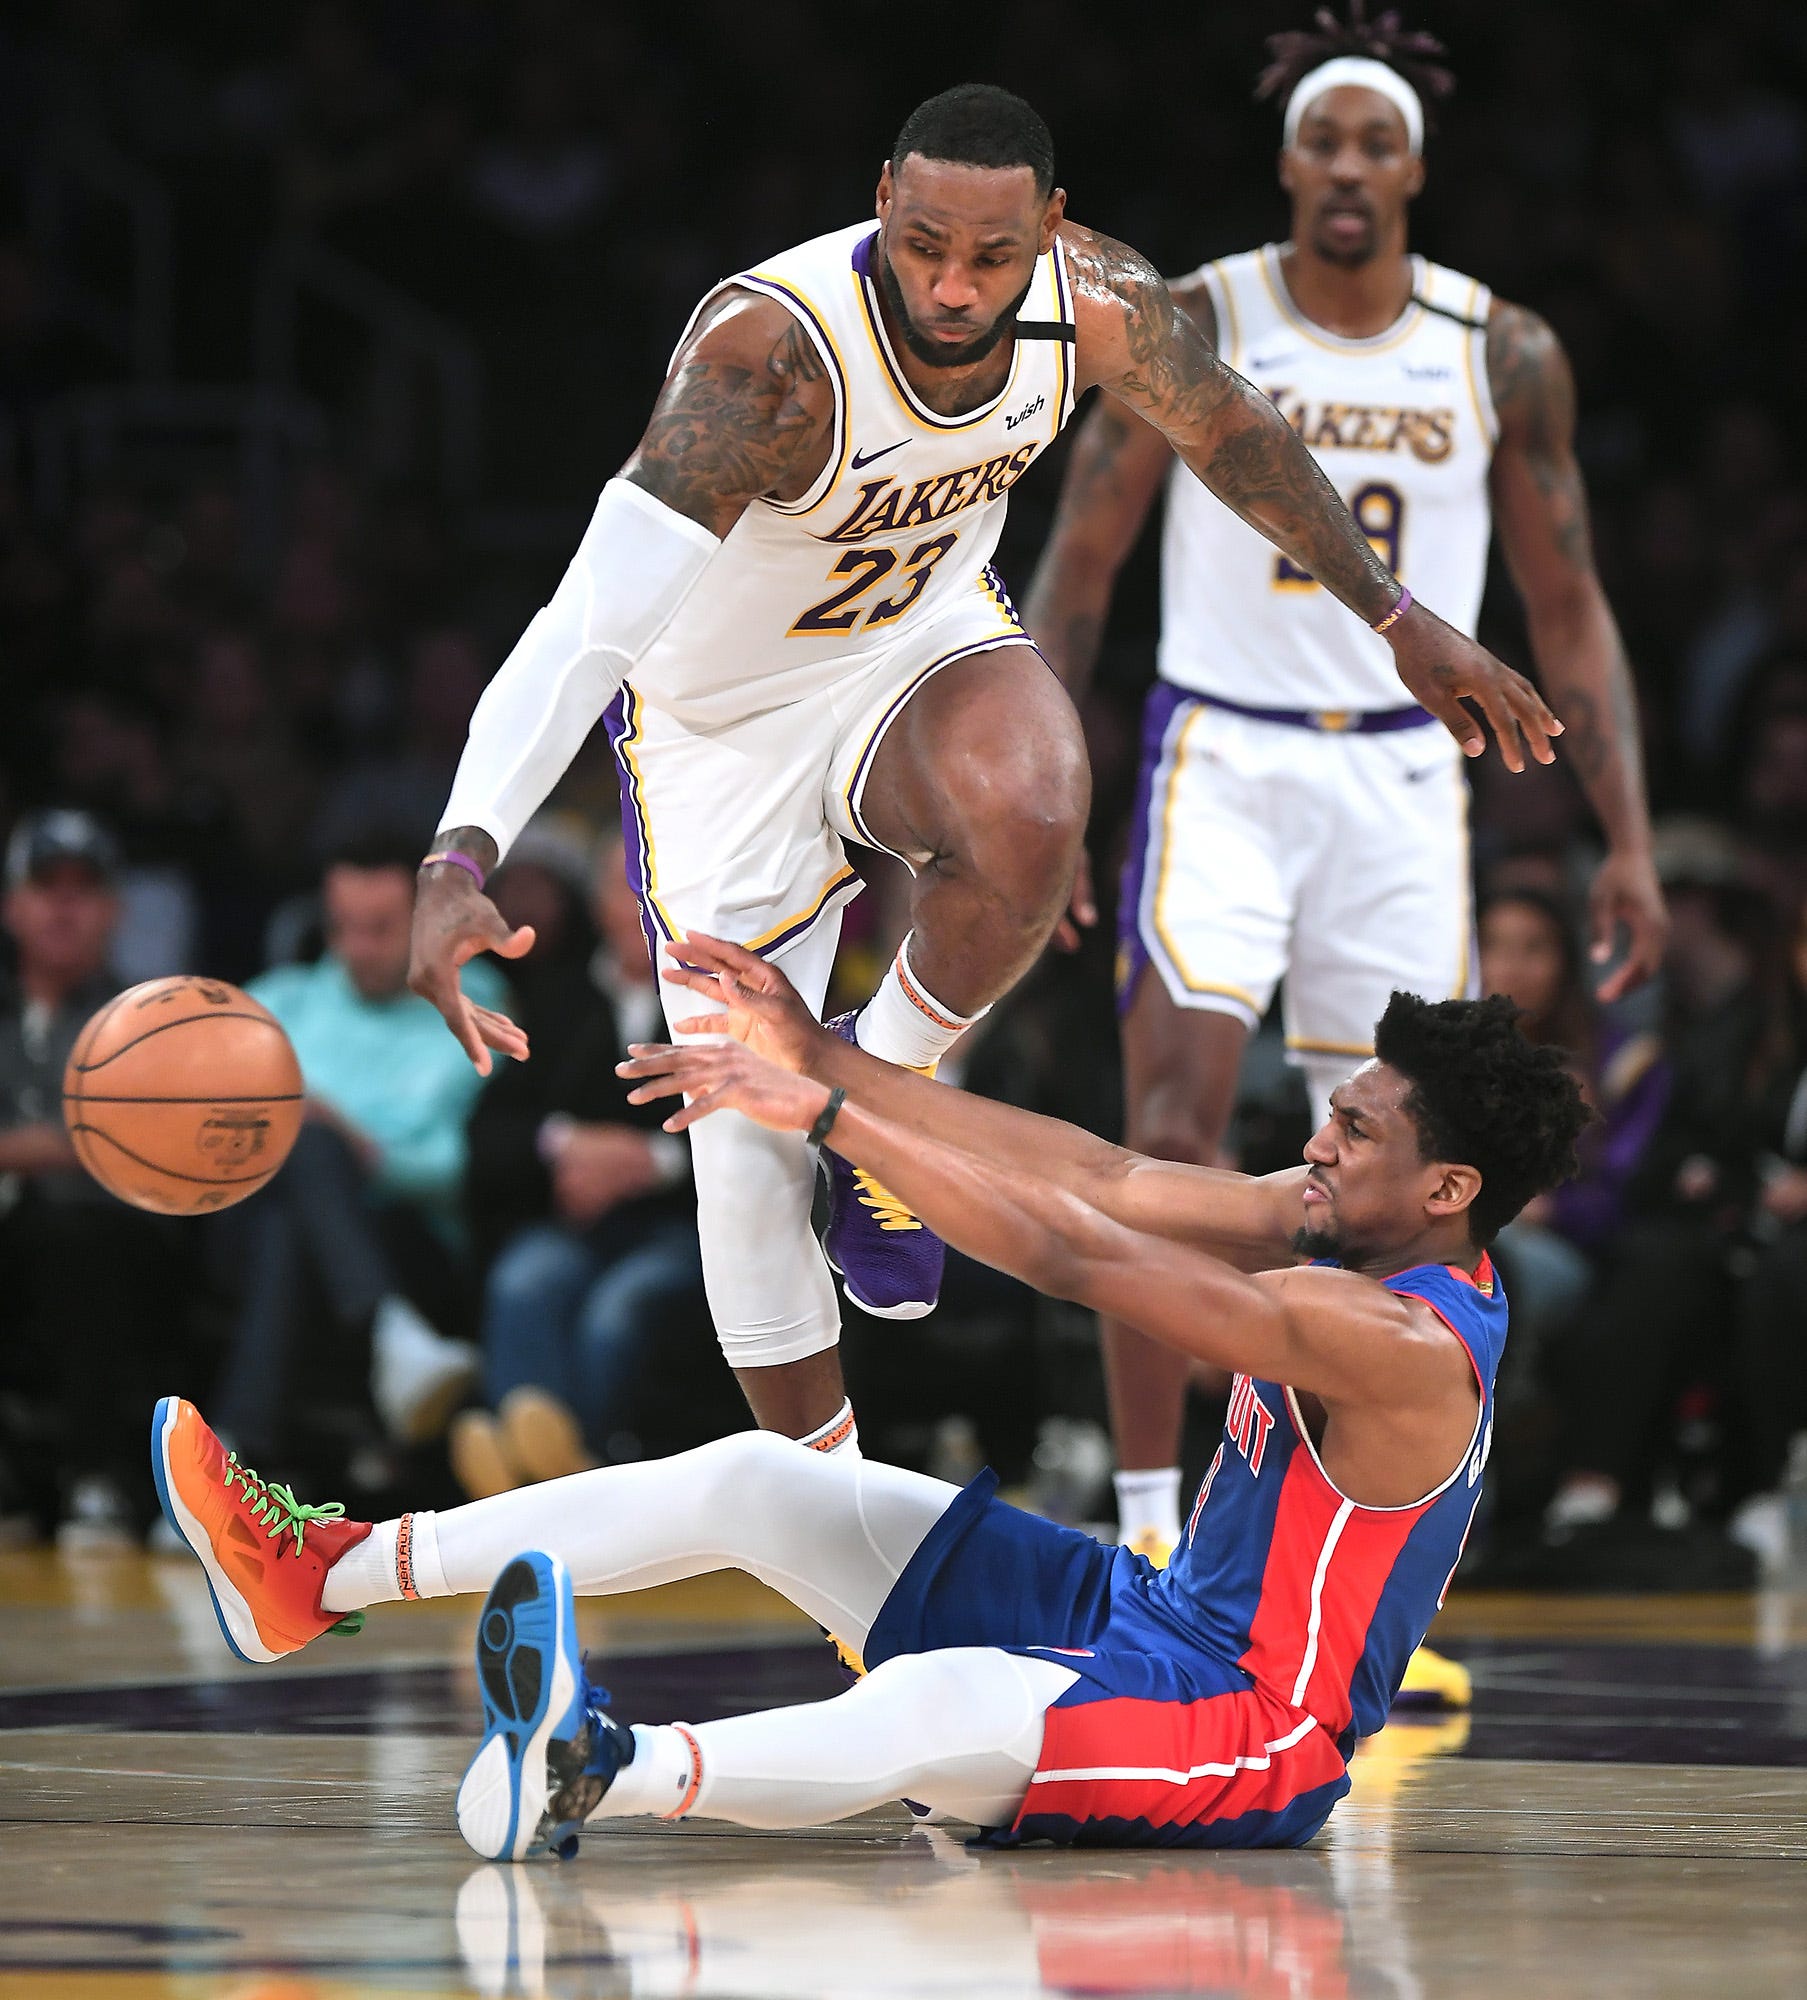 Los Angeles Lakers' LeBron James and Detroit Pistons' Langston Galloway battle for a loose ball in the second quarter.